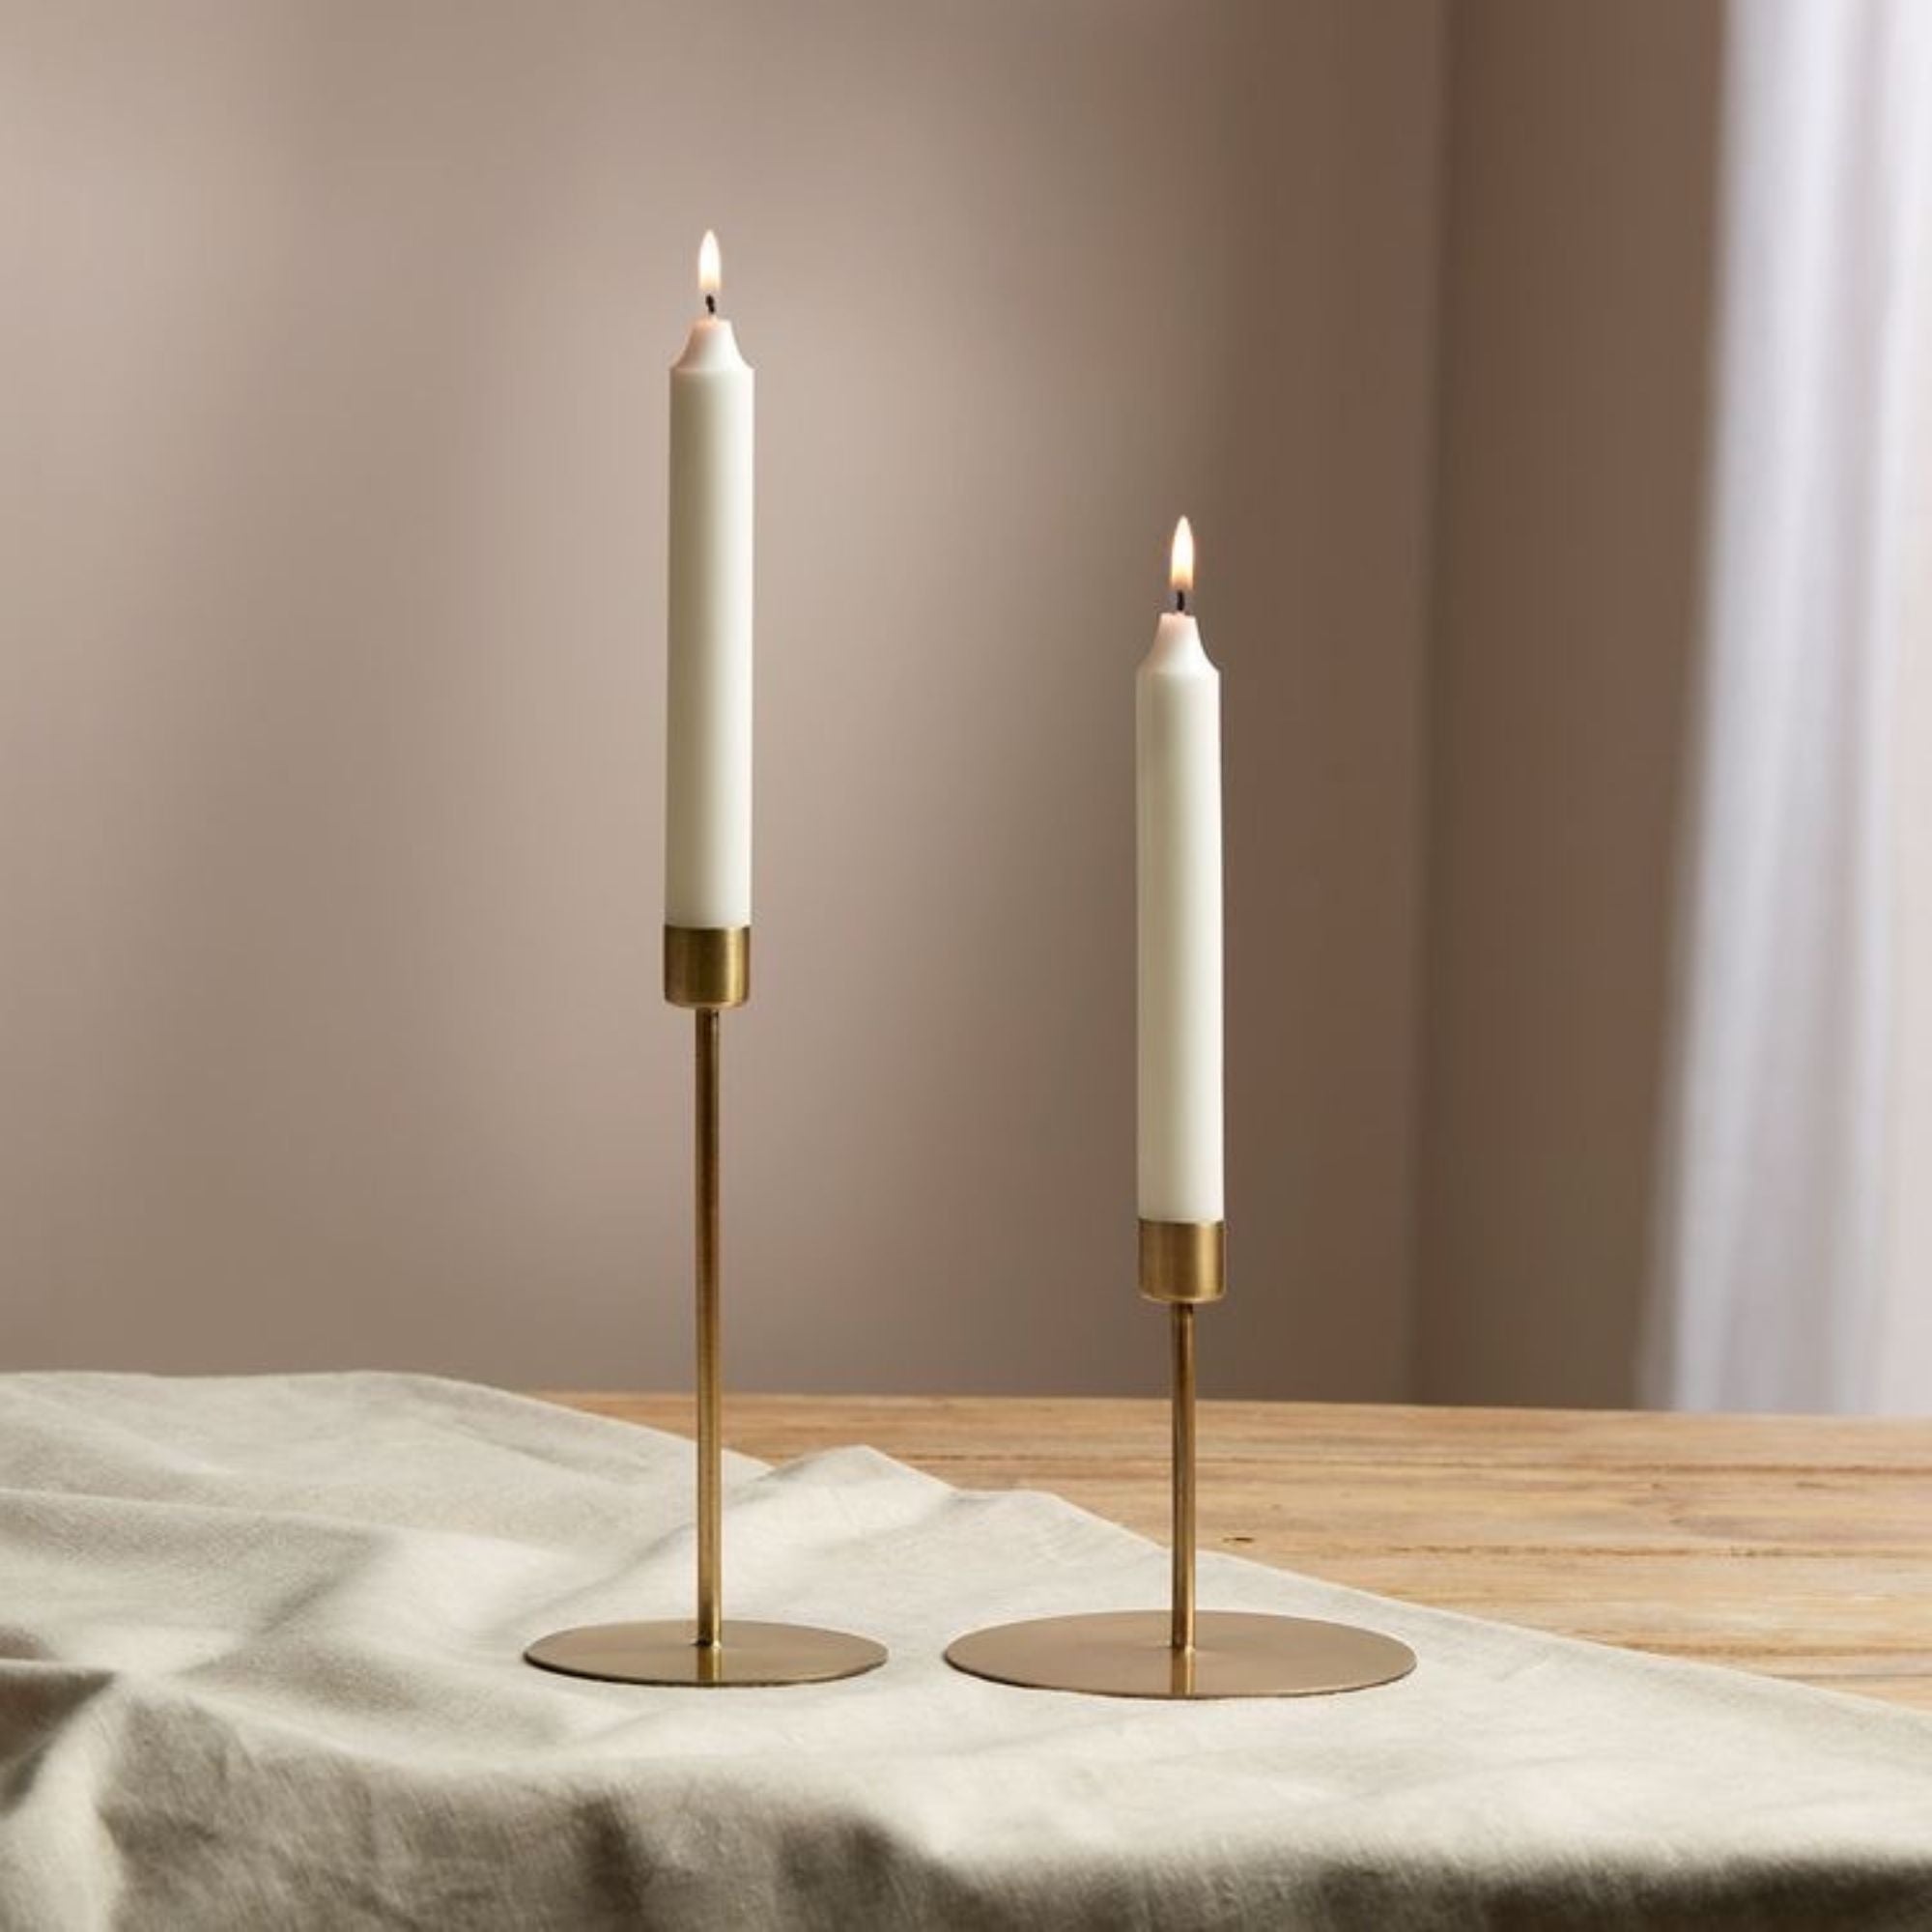 Taper Candles & Brass Candle Holders